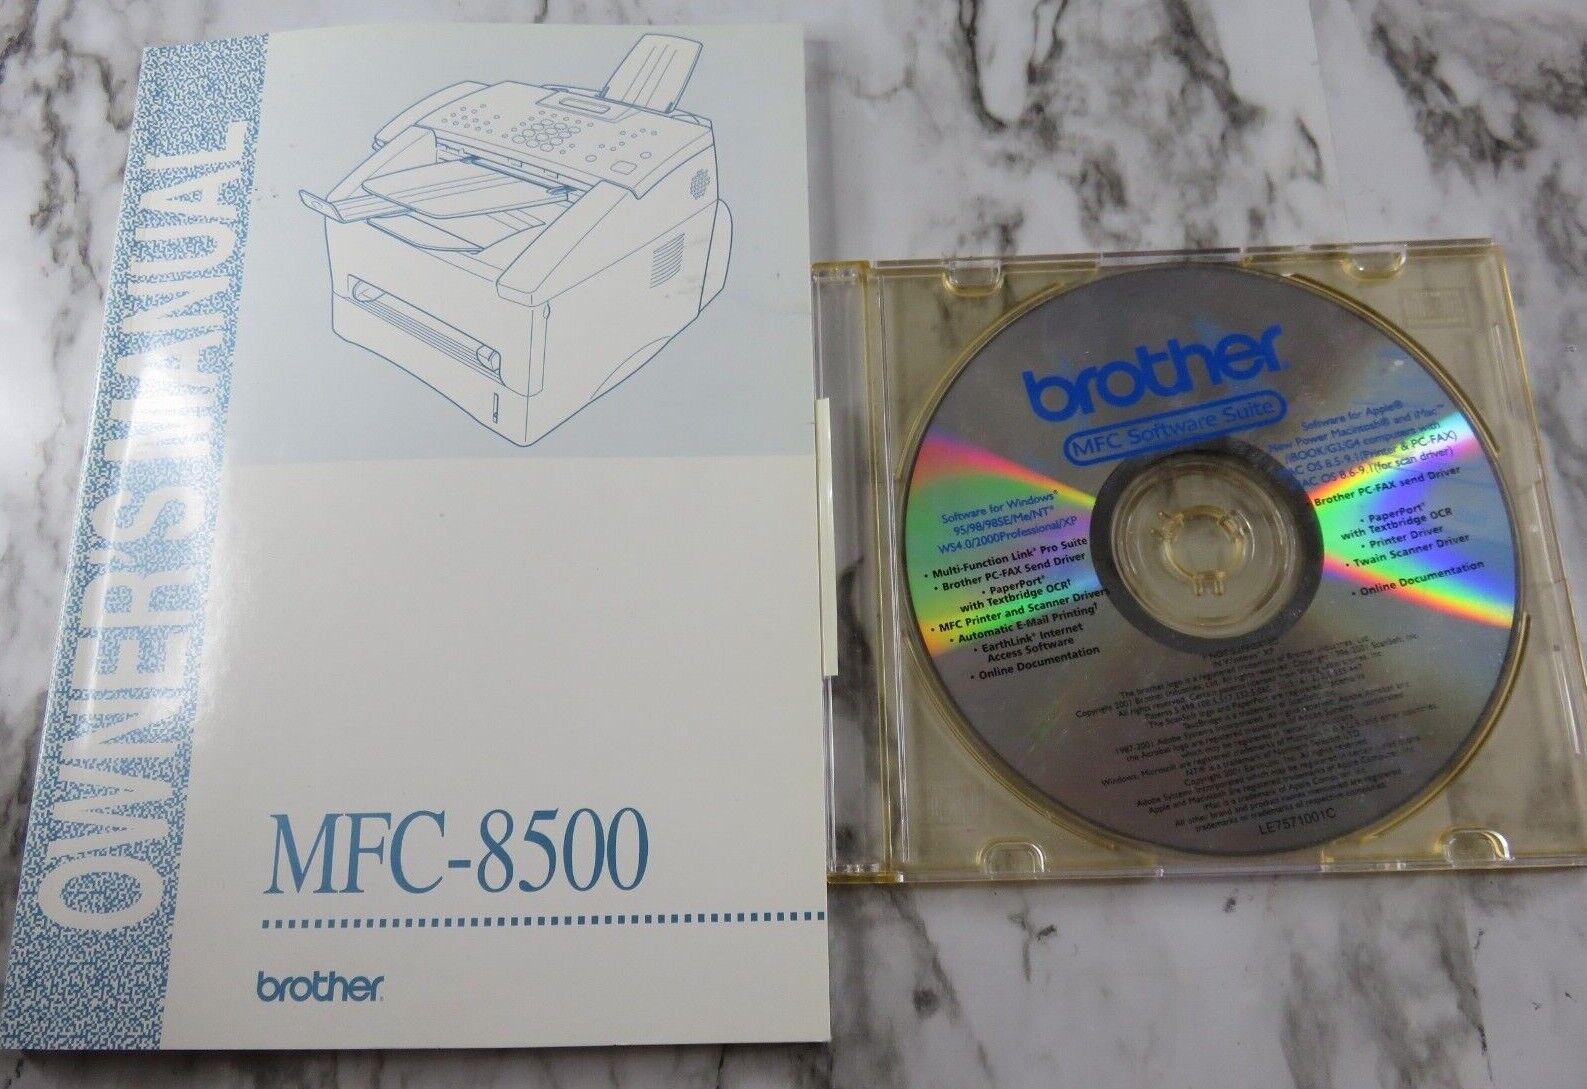 Brother Mfc Software Suite Cd & Manual For Mfc-8500